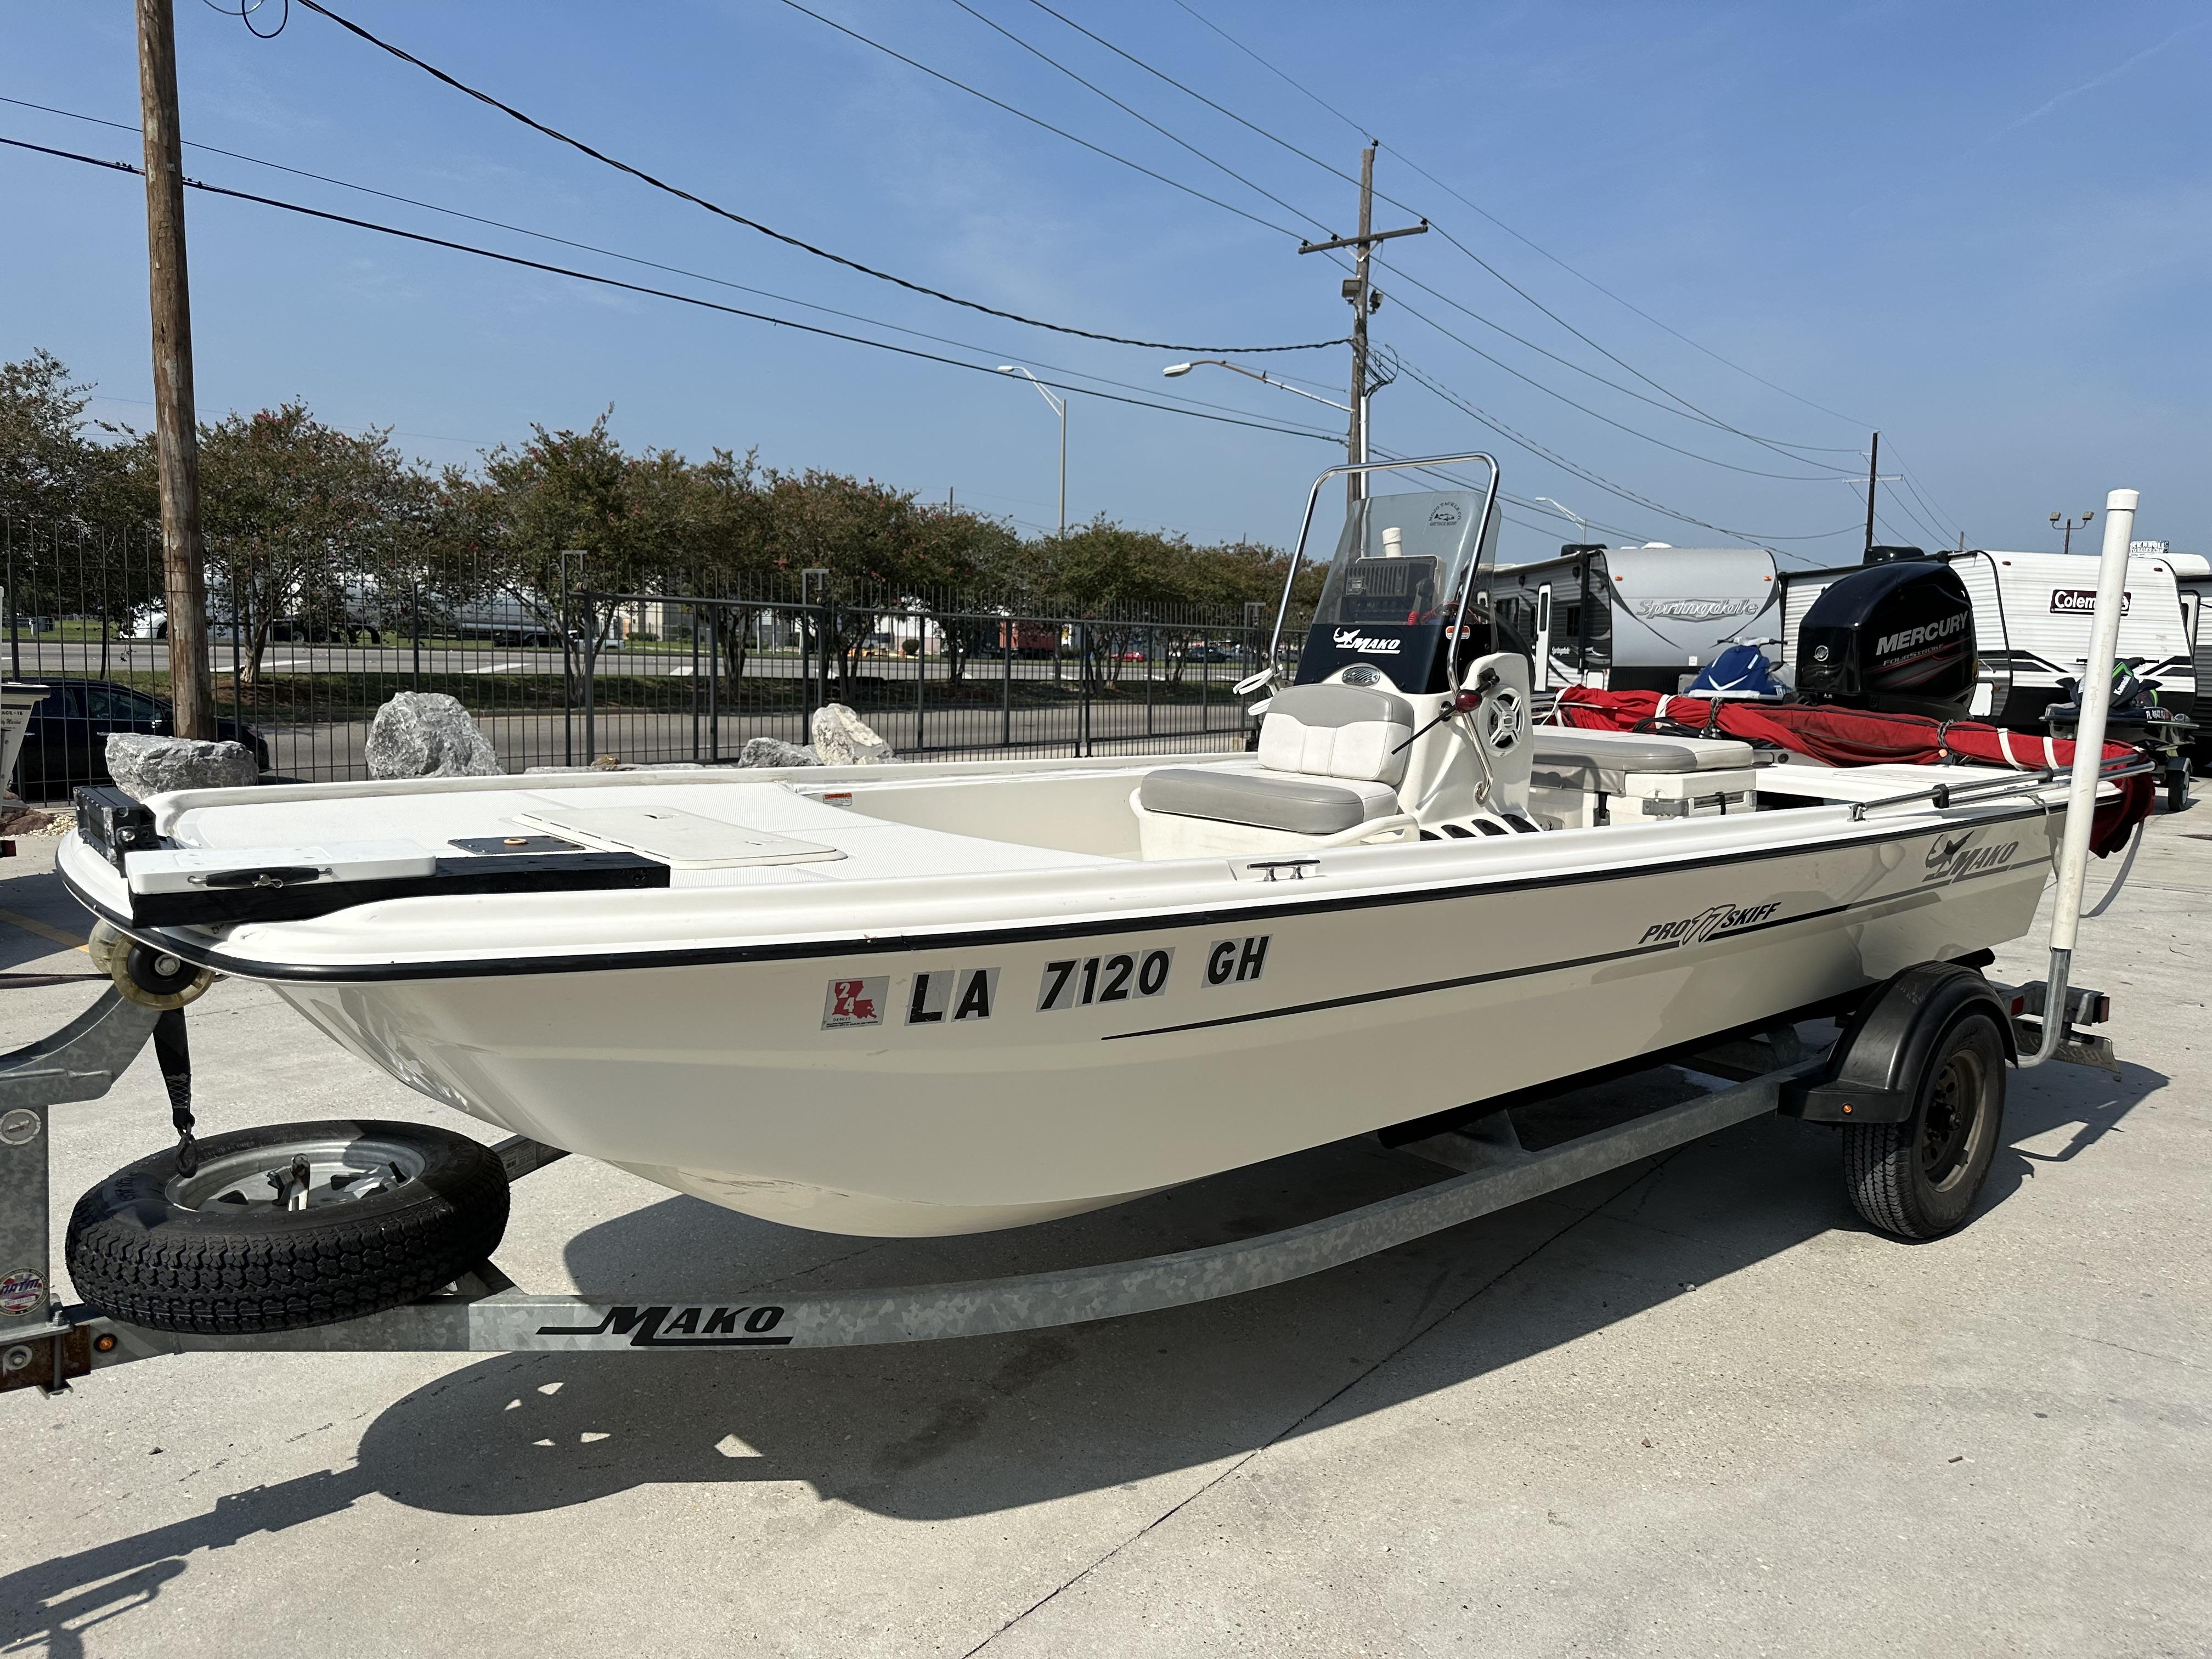 2018 Mako 17 Pro Skiff w/only 88 hrs on 2018 Merc 60hp $18500 firm Houston  TX area - The Hull Truth - Boating and Fishing Forum